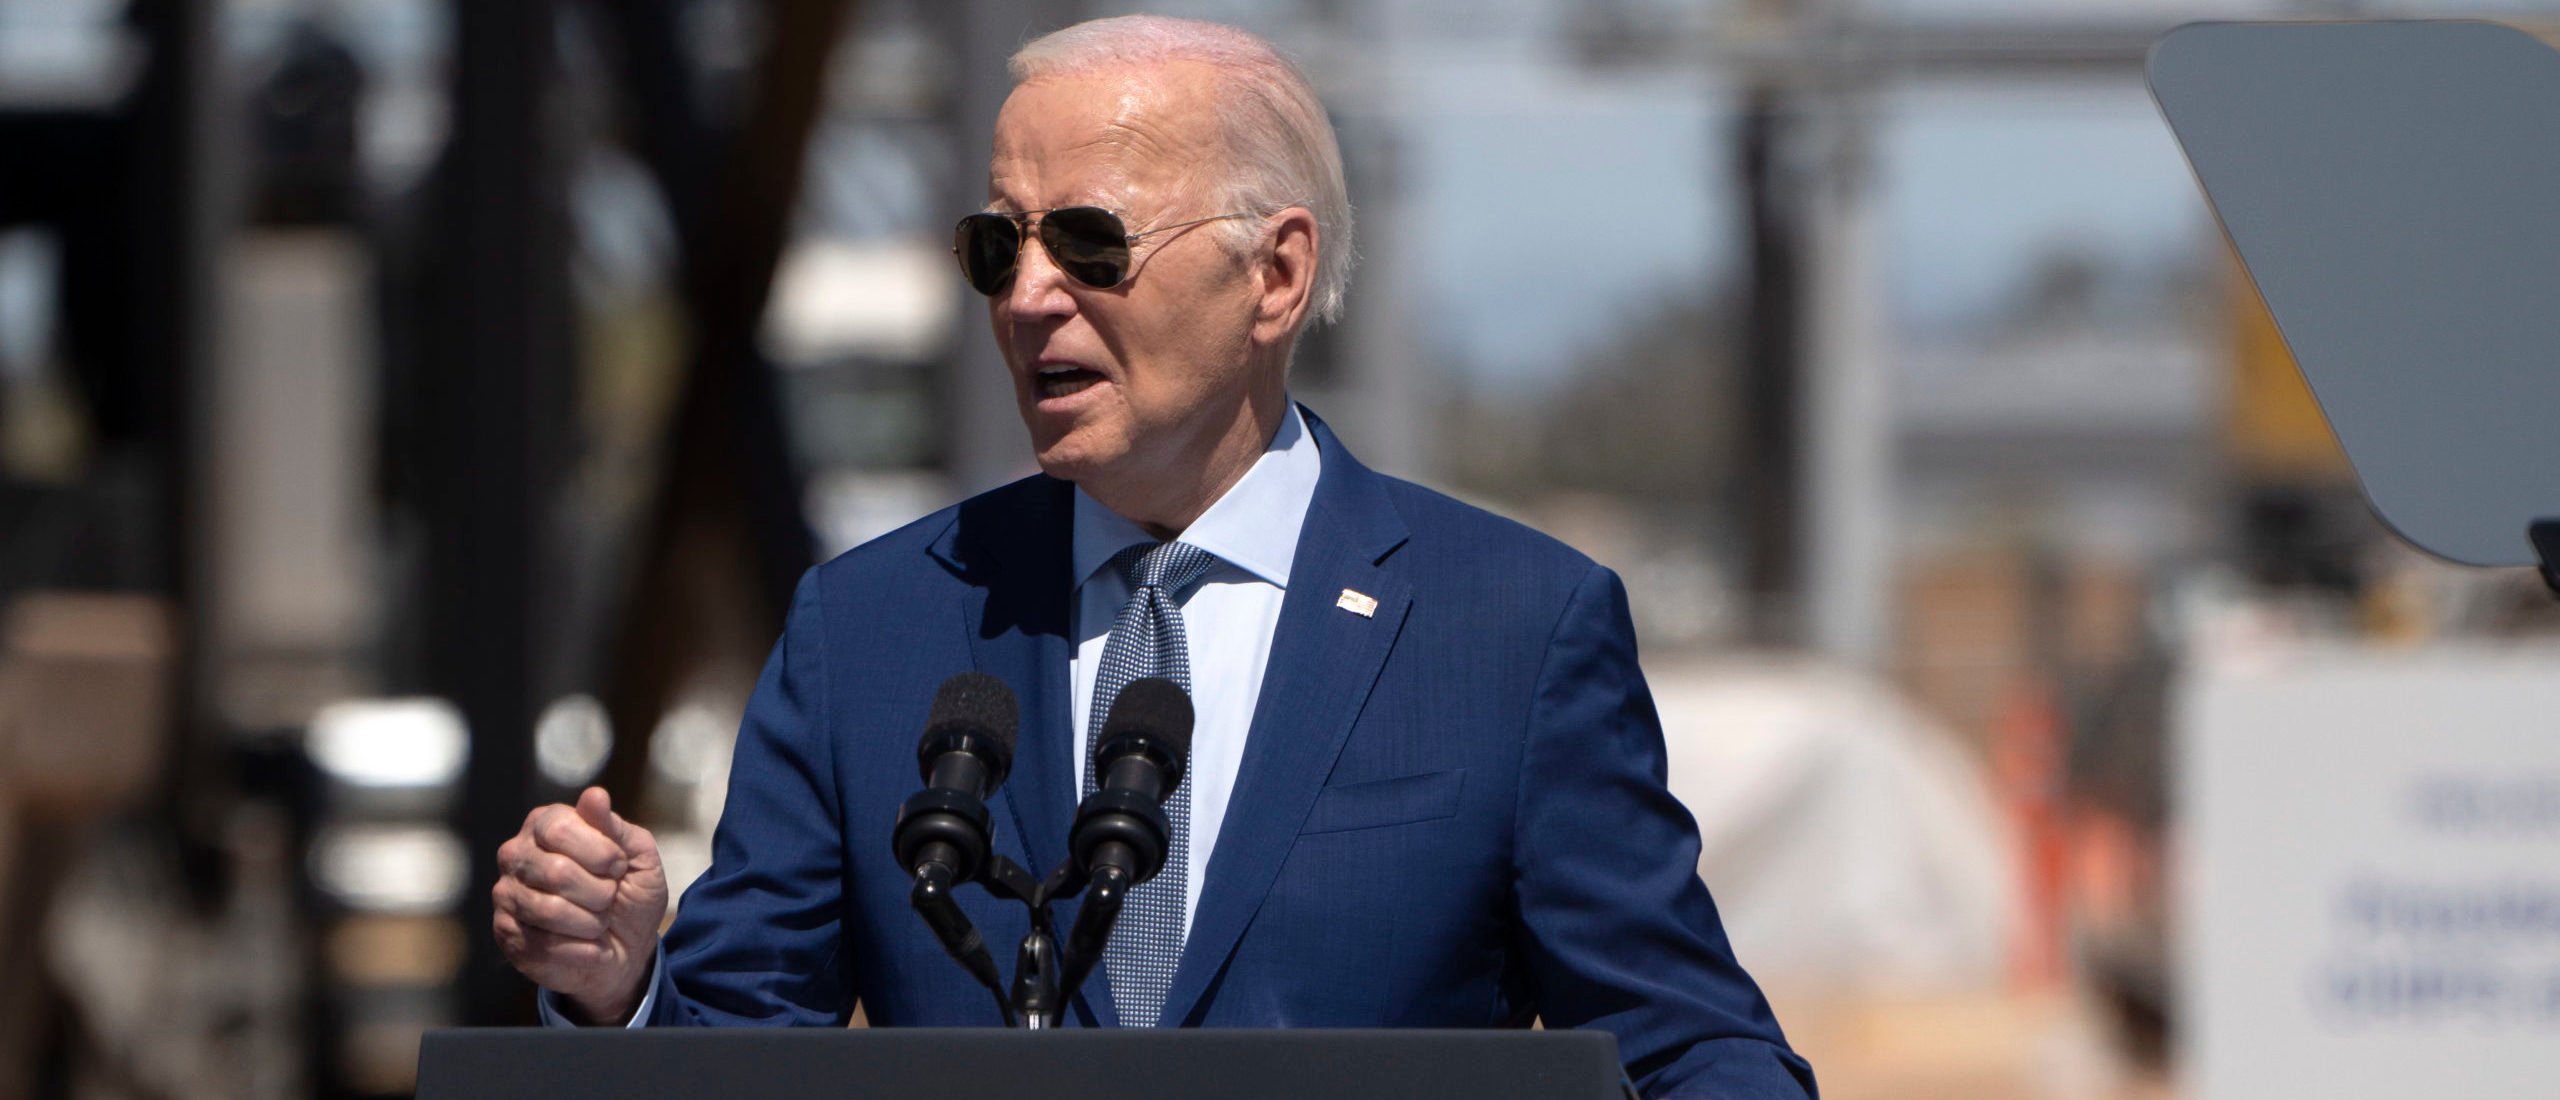 US President Joe Biden gives a speech at Intel Ocotillo Campus on March 20, 2024 in Chandler, Arizona. Biden announced $8.5 billion in federal funding from the CHIPS Act for Intel Corp. to manufacture semiconductors in Arizona. (Photo by Rebecca Noble/Getty Images)